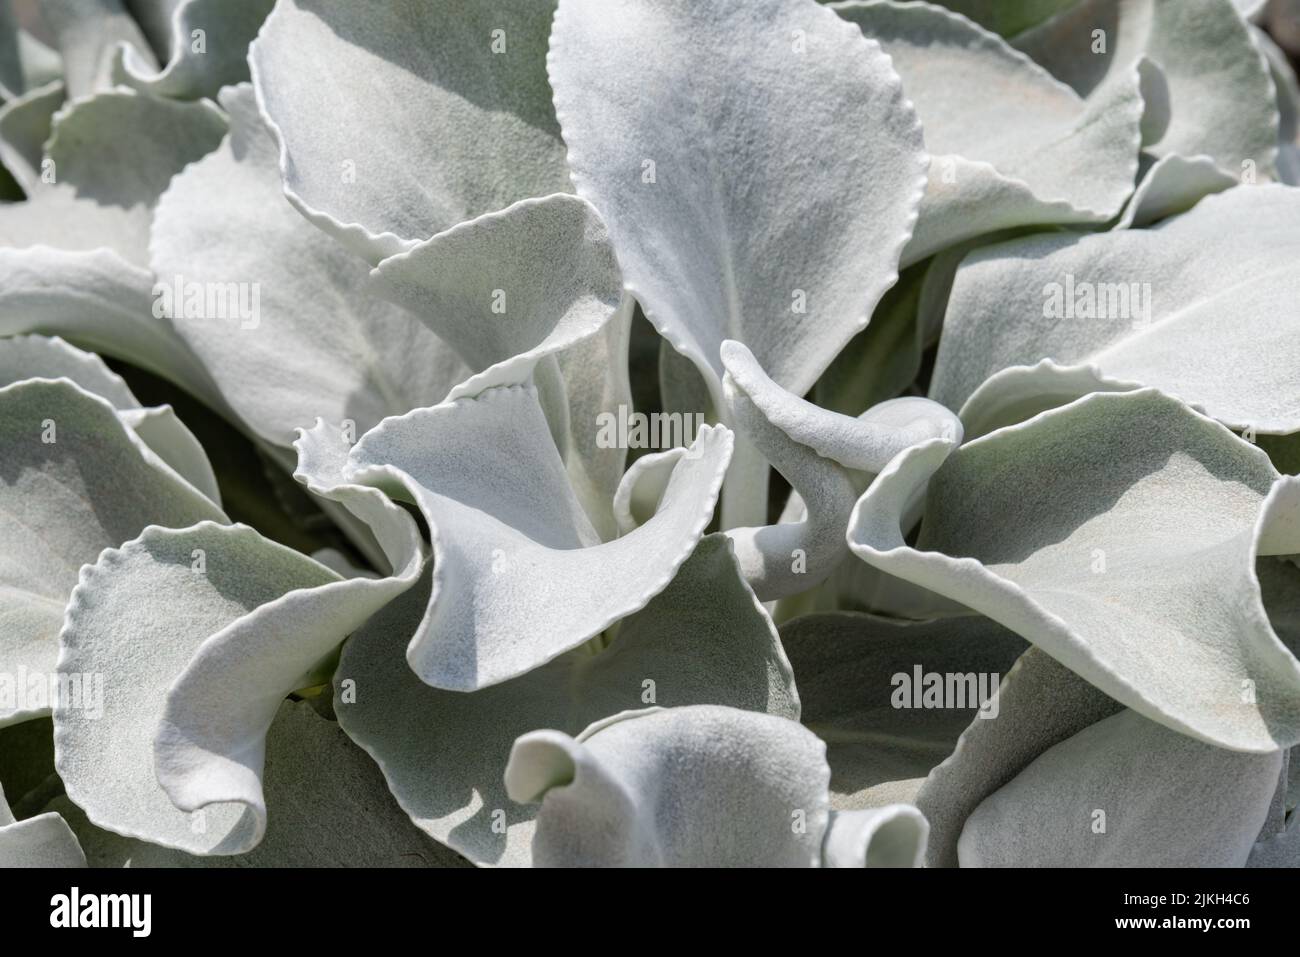 The beautiful angel wings (senecio candicans) in the garden on a sunny day Stock Photo